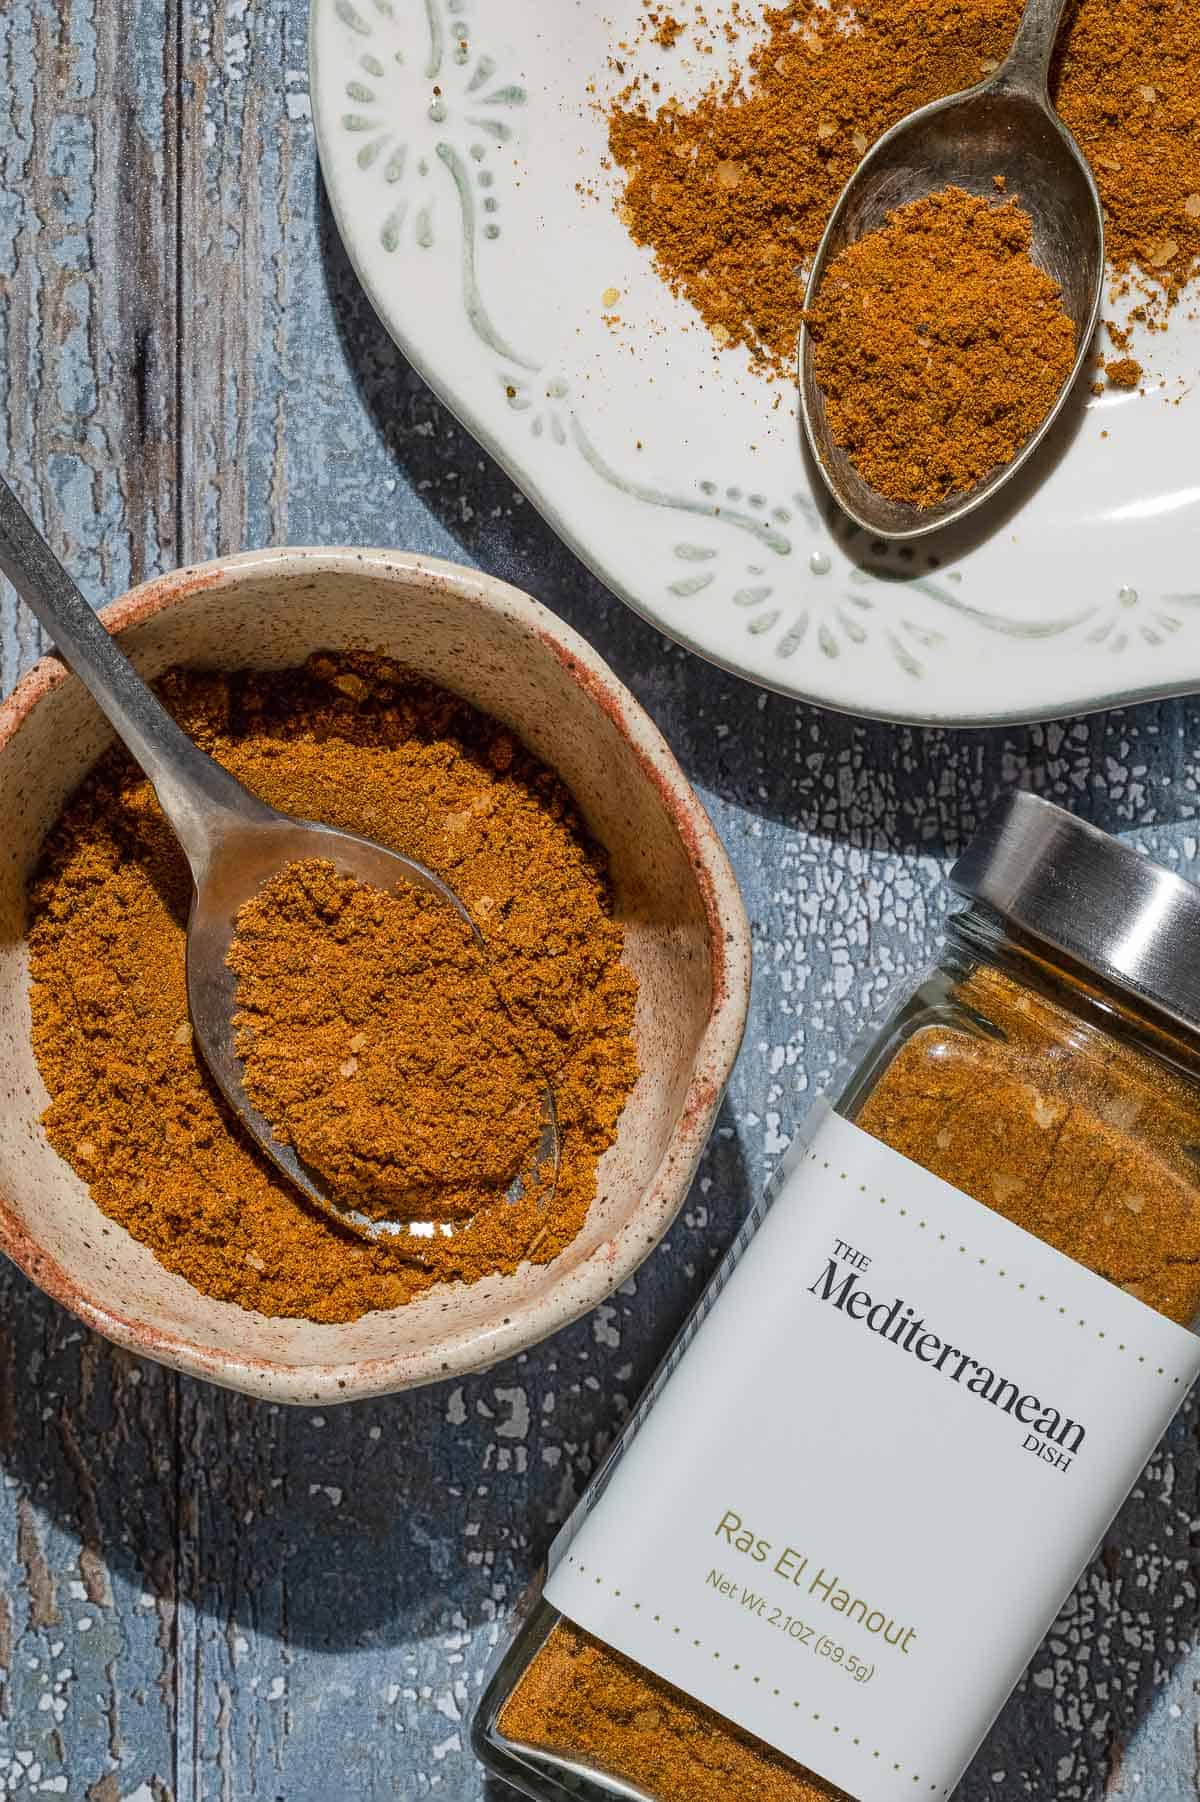 Ras el hanout on a plate with a spoon, in a bowl with a spoon, and a jar of the ras el hanout from the mediterranean dish.